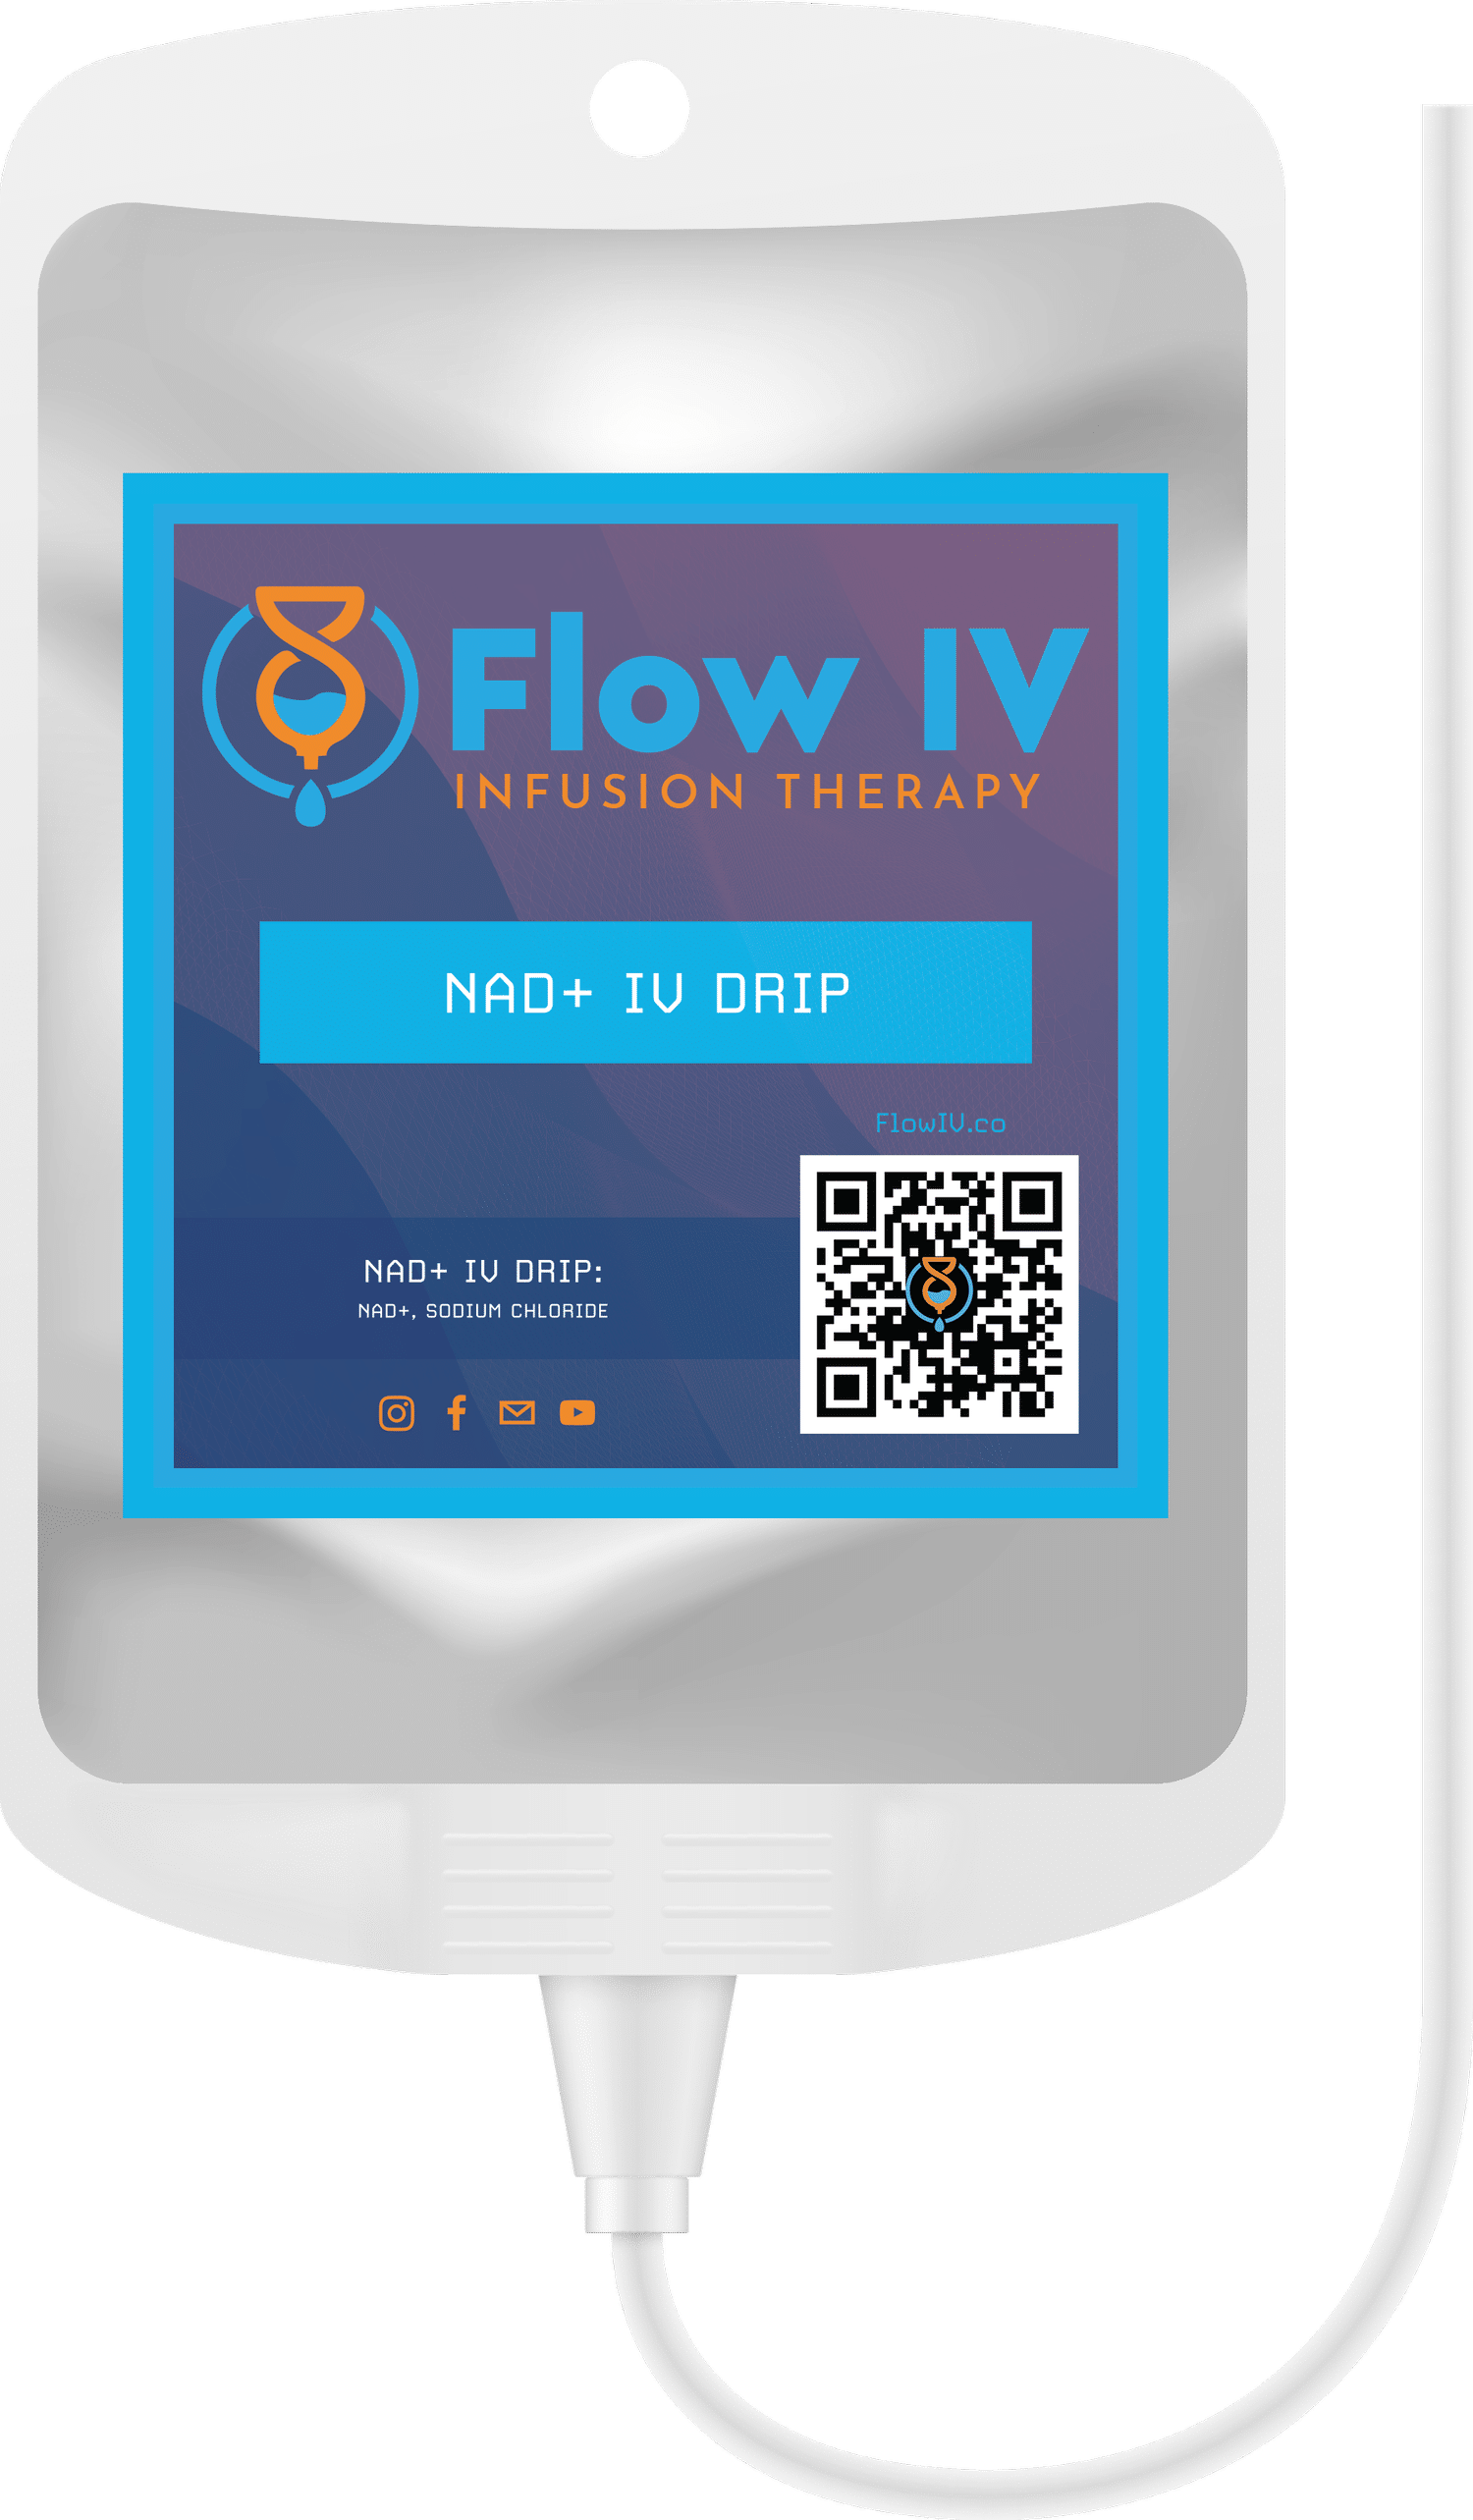 An image of the Flow NAD drip bag